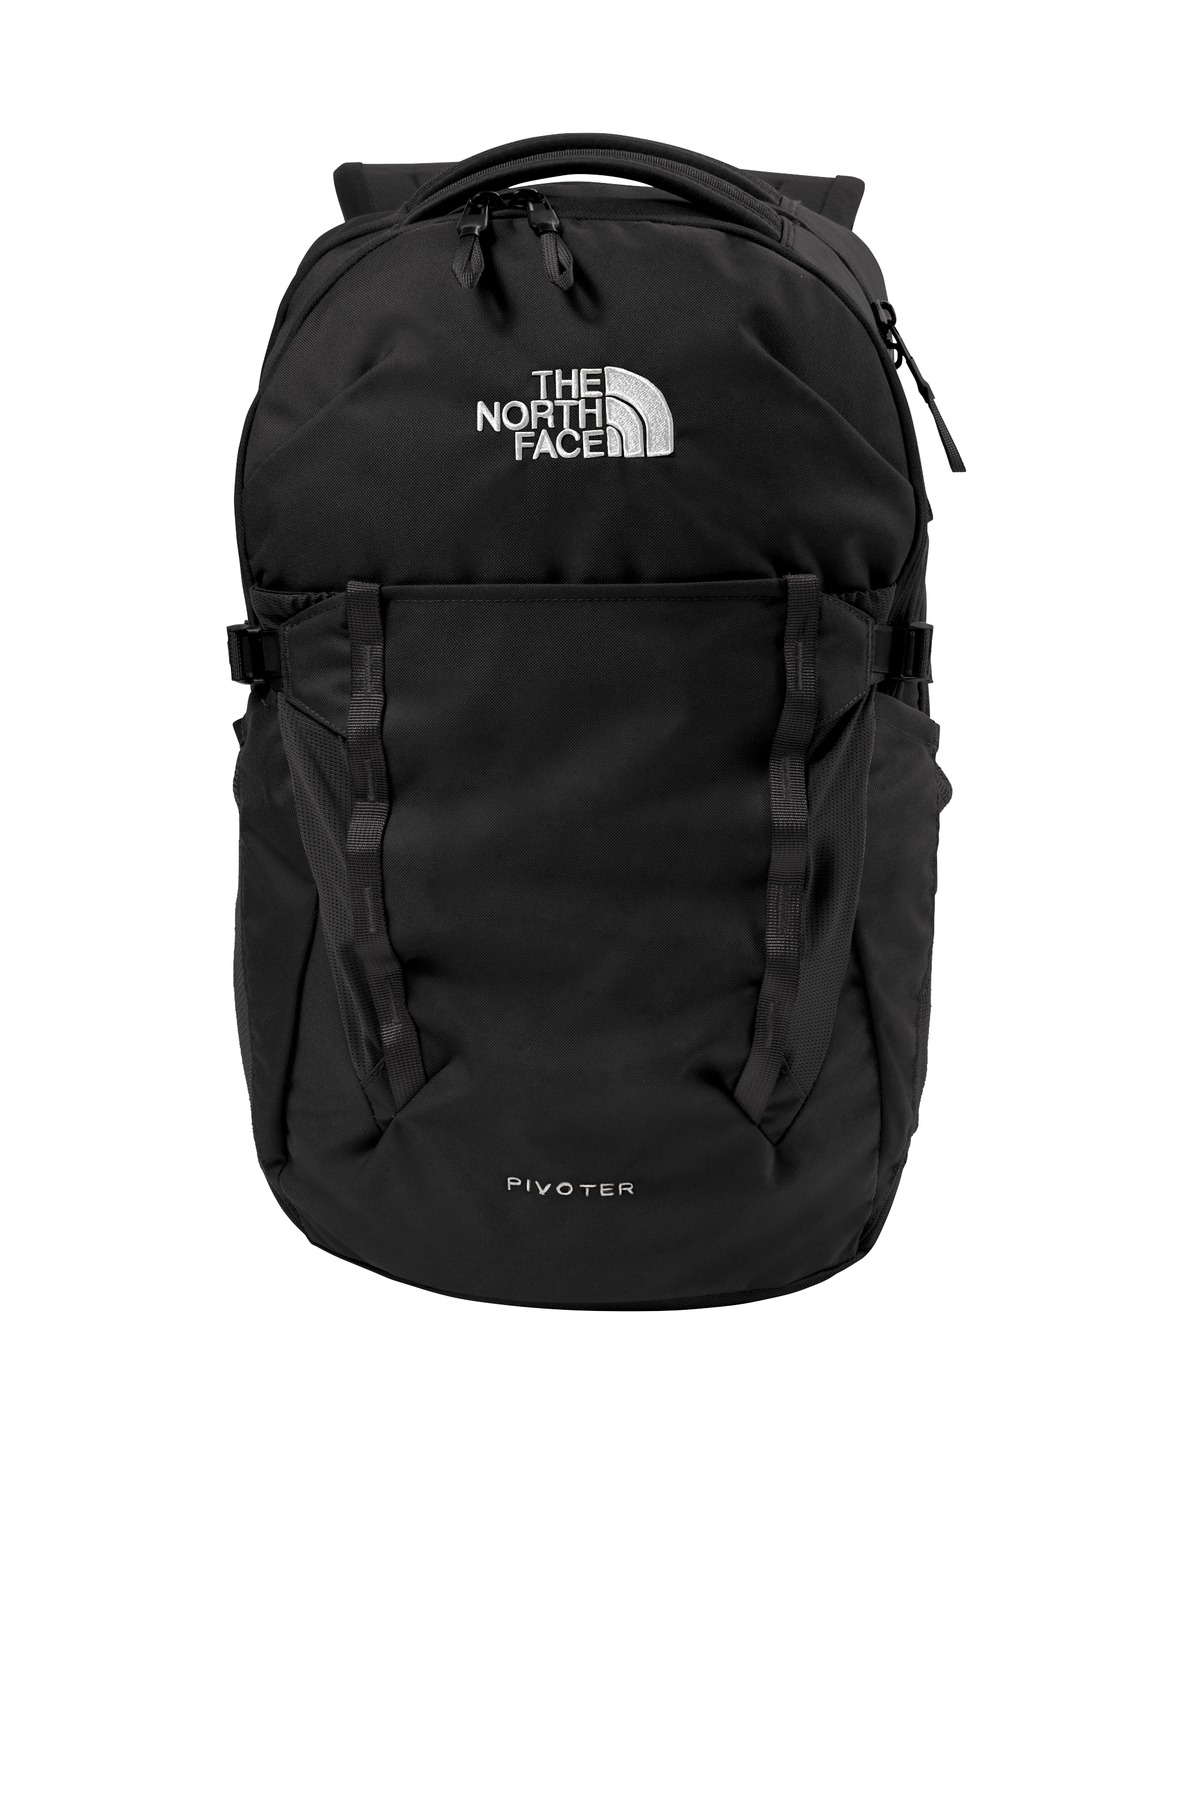 DISCONTINUED The North Face Dyno Backpack-